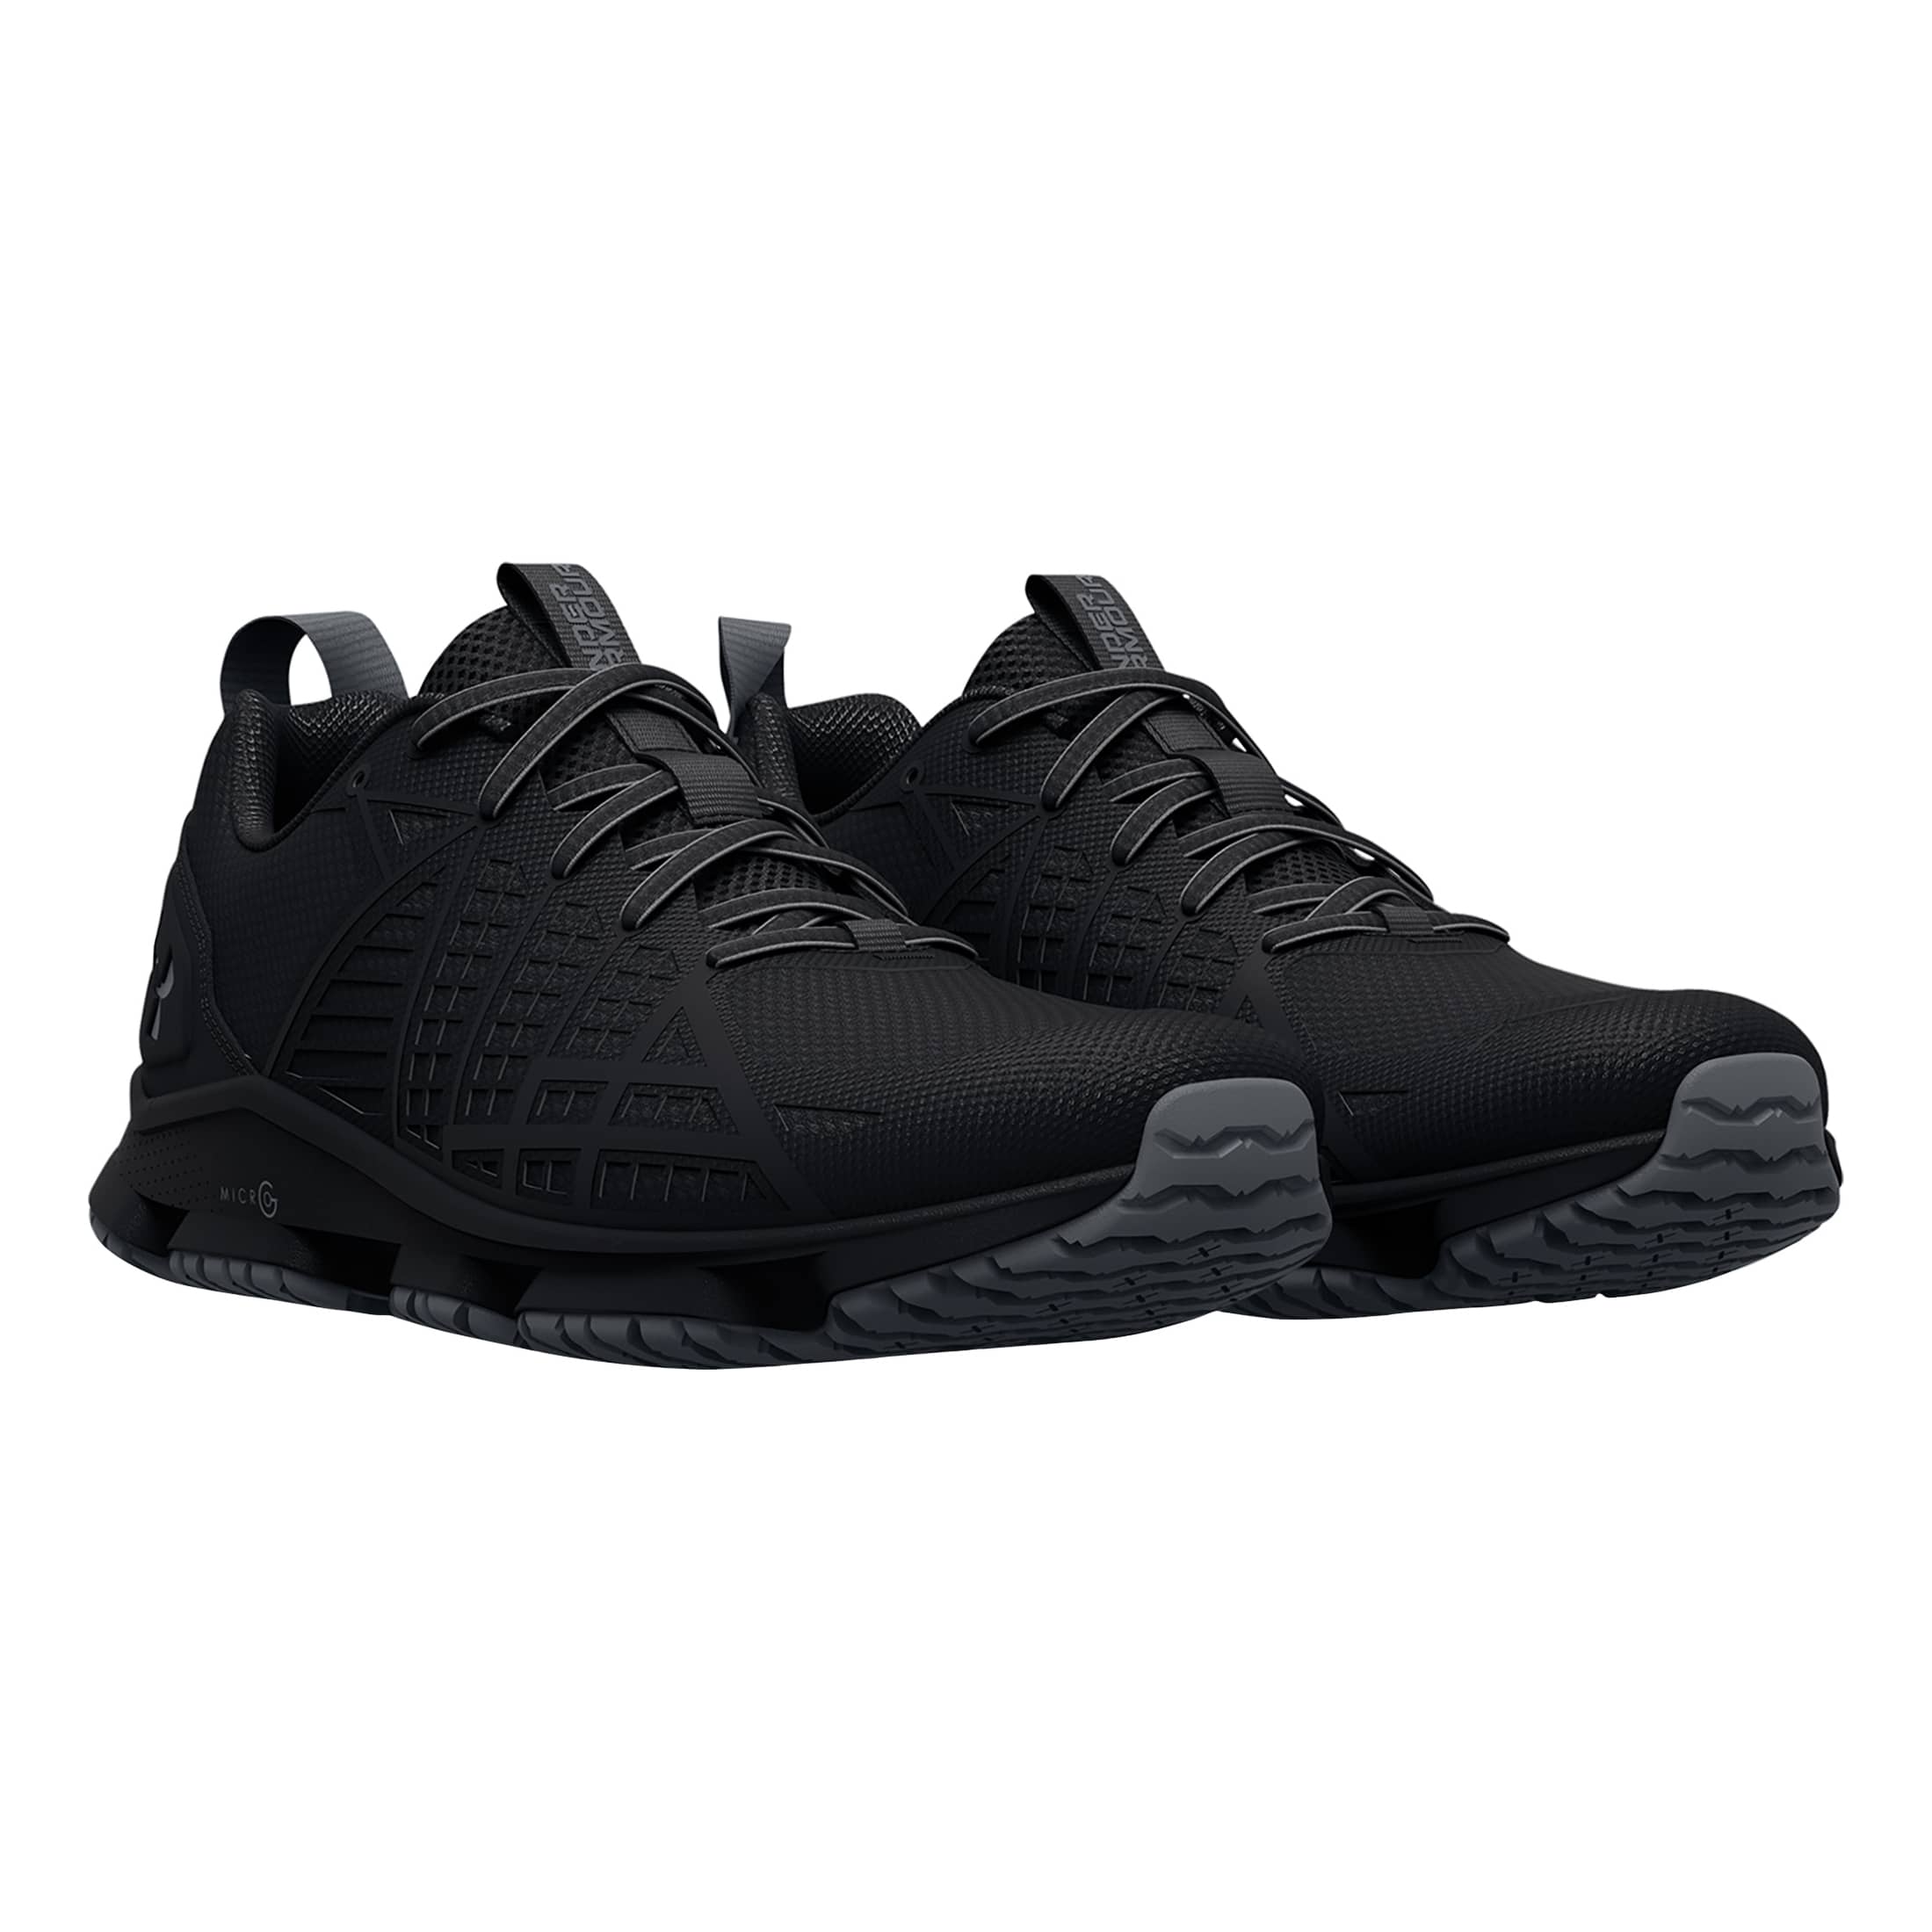 Under Armour® Women’s Micro G® Strikefast Tactical Shoes - pair